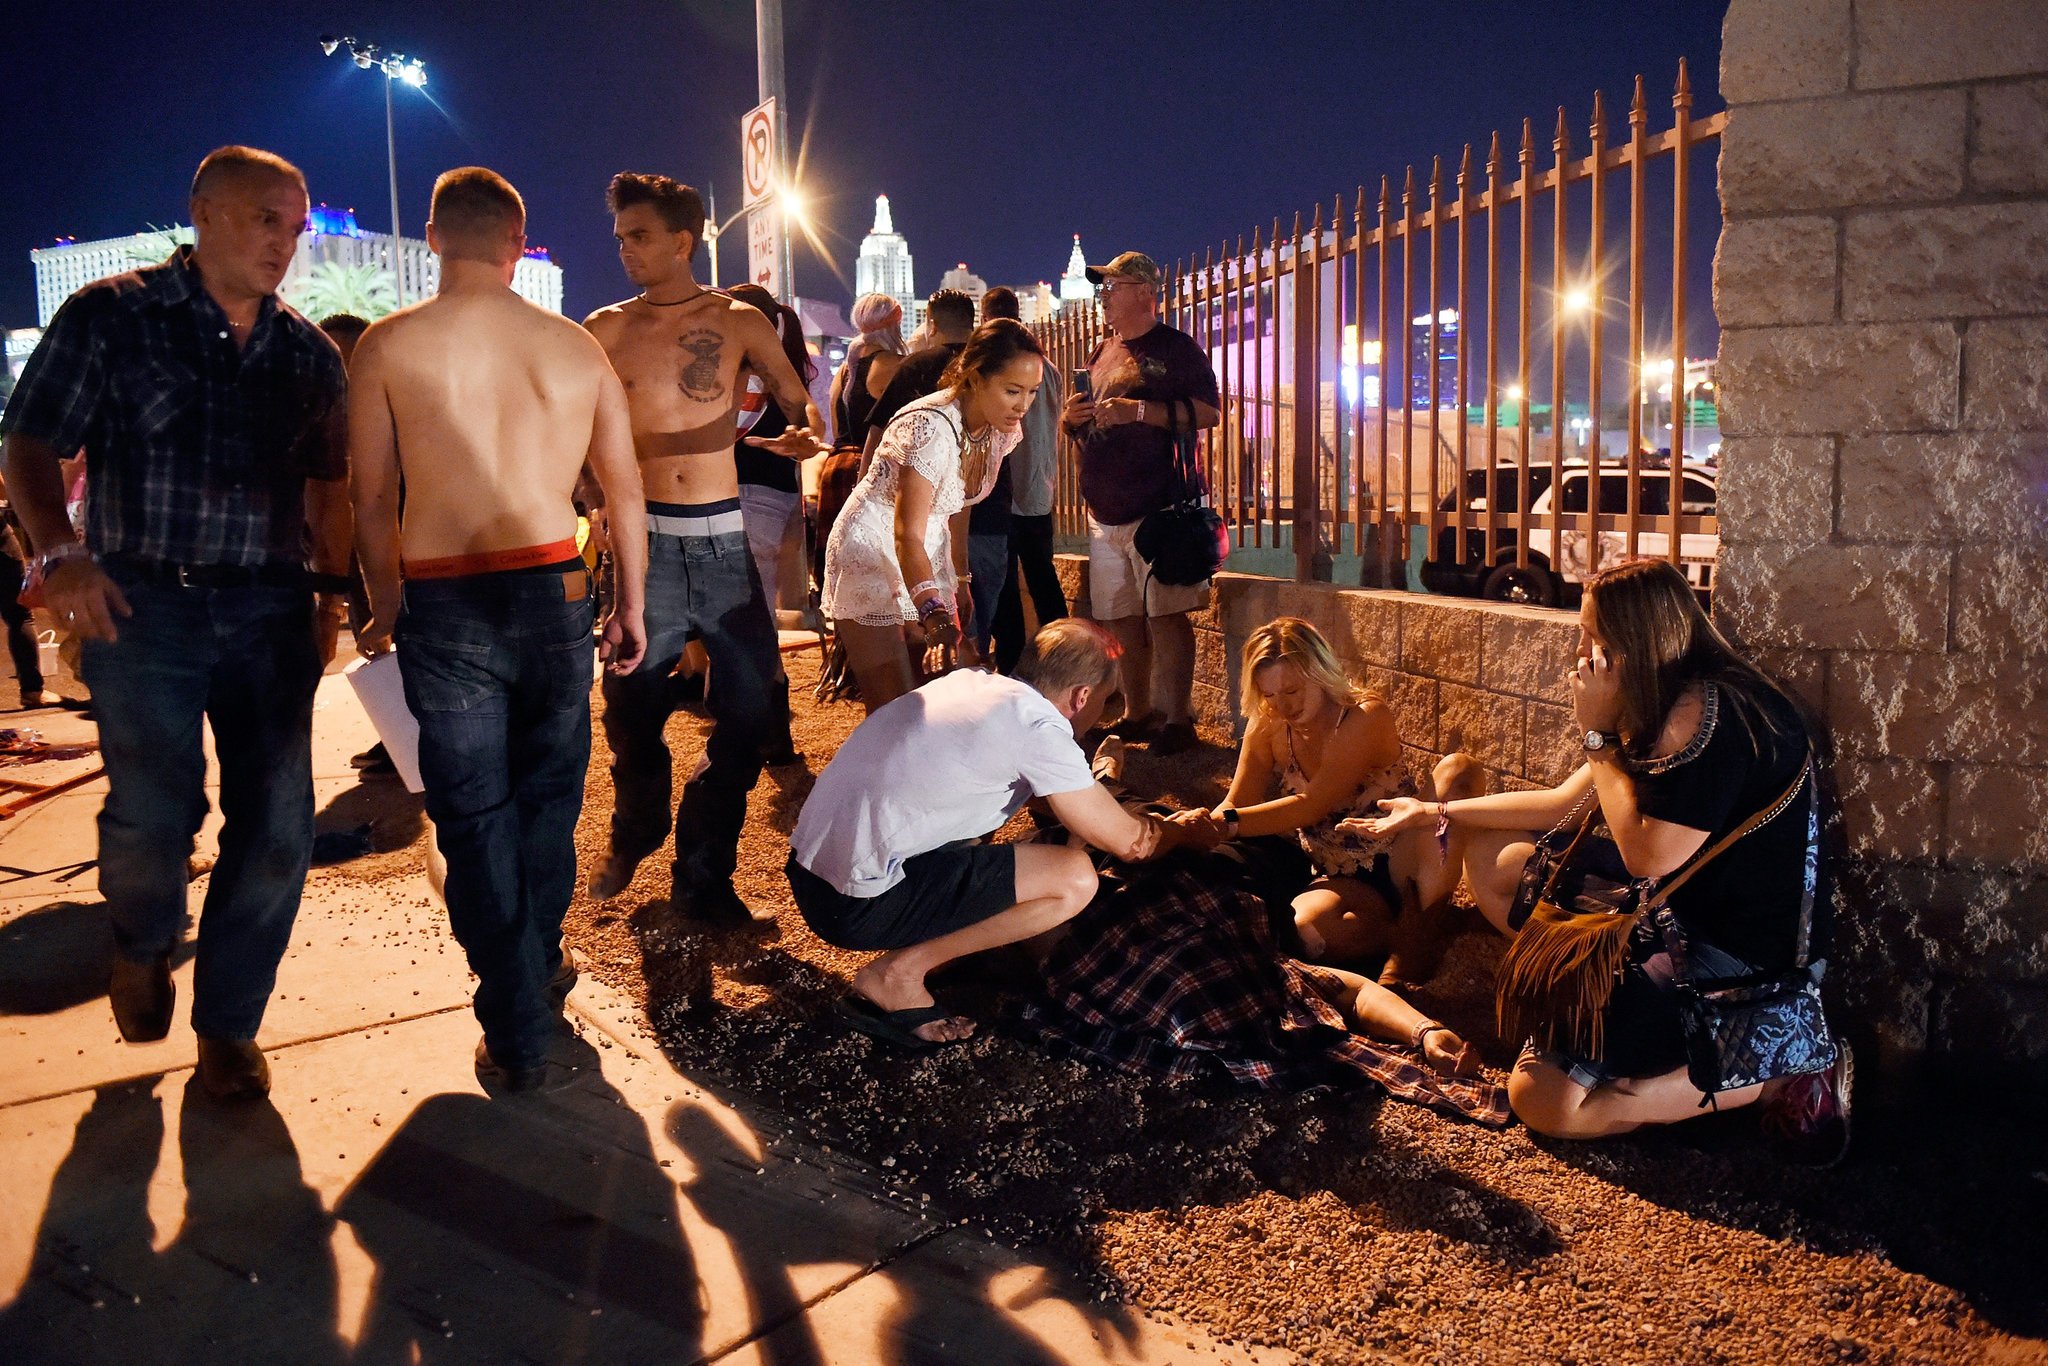 More than 50 dead, 400 injured in Las Vegas after deadliest shooting in American history